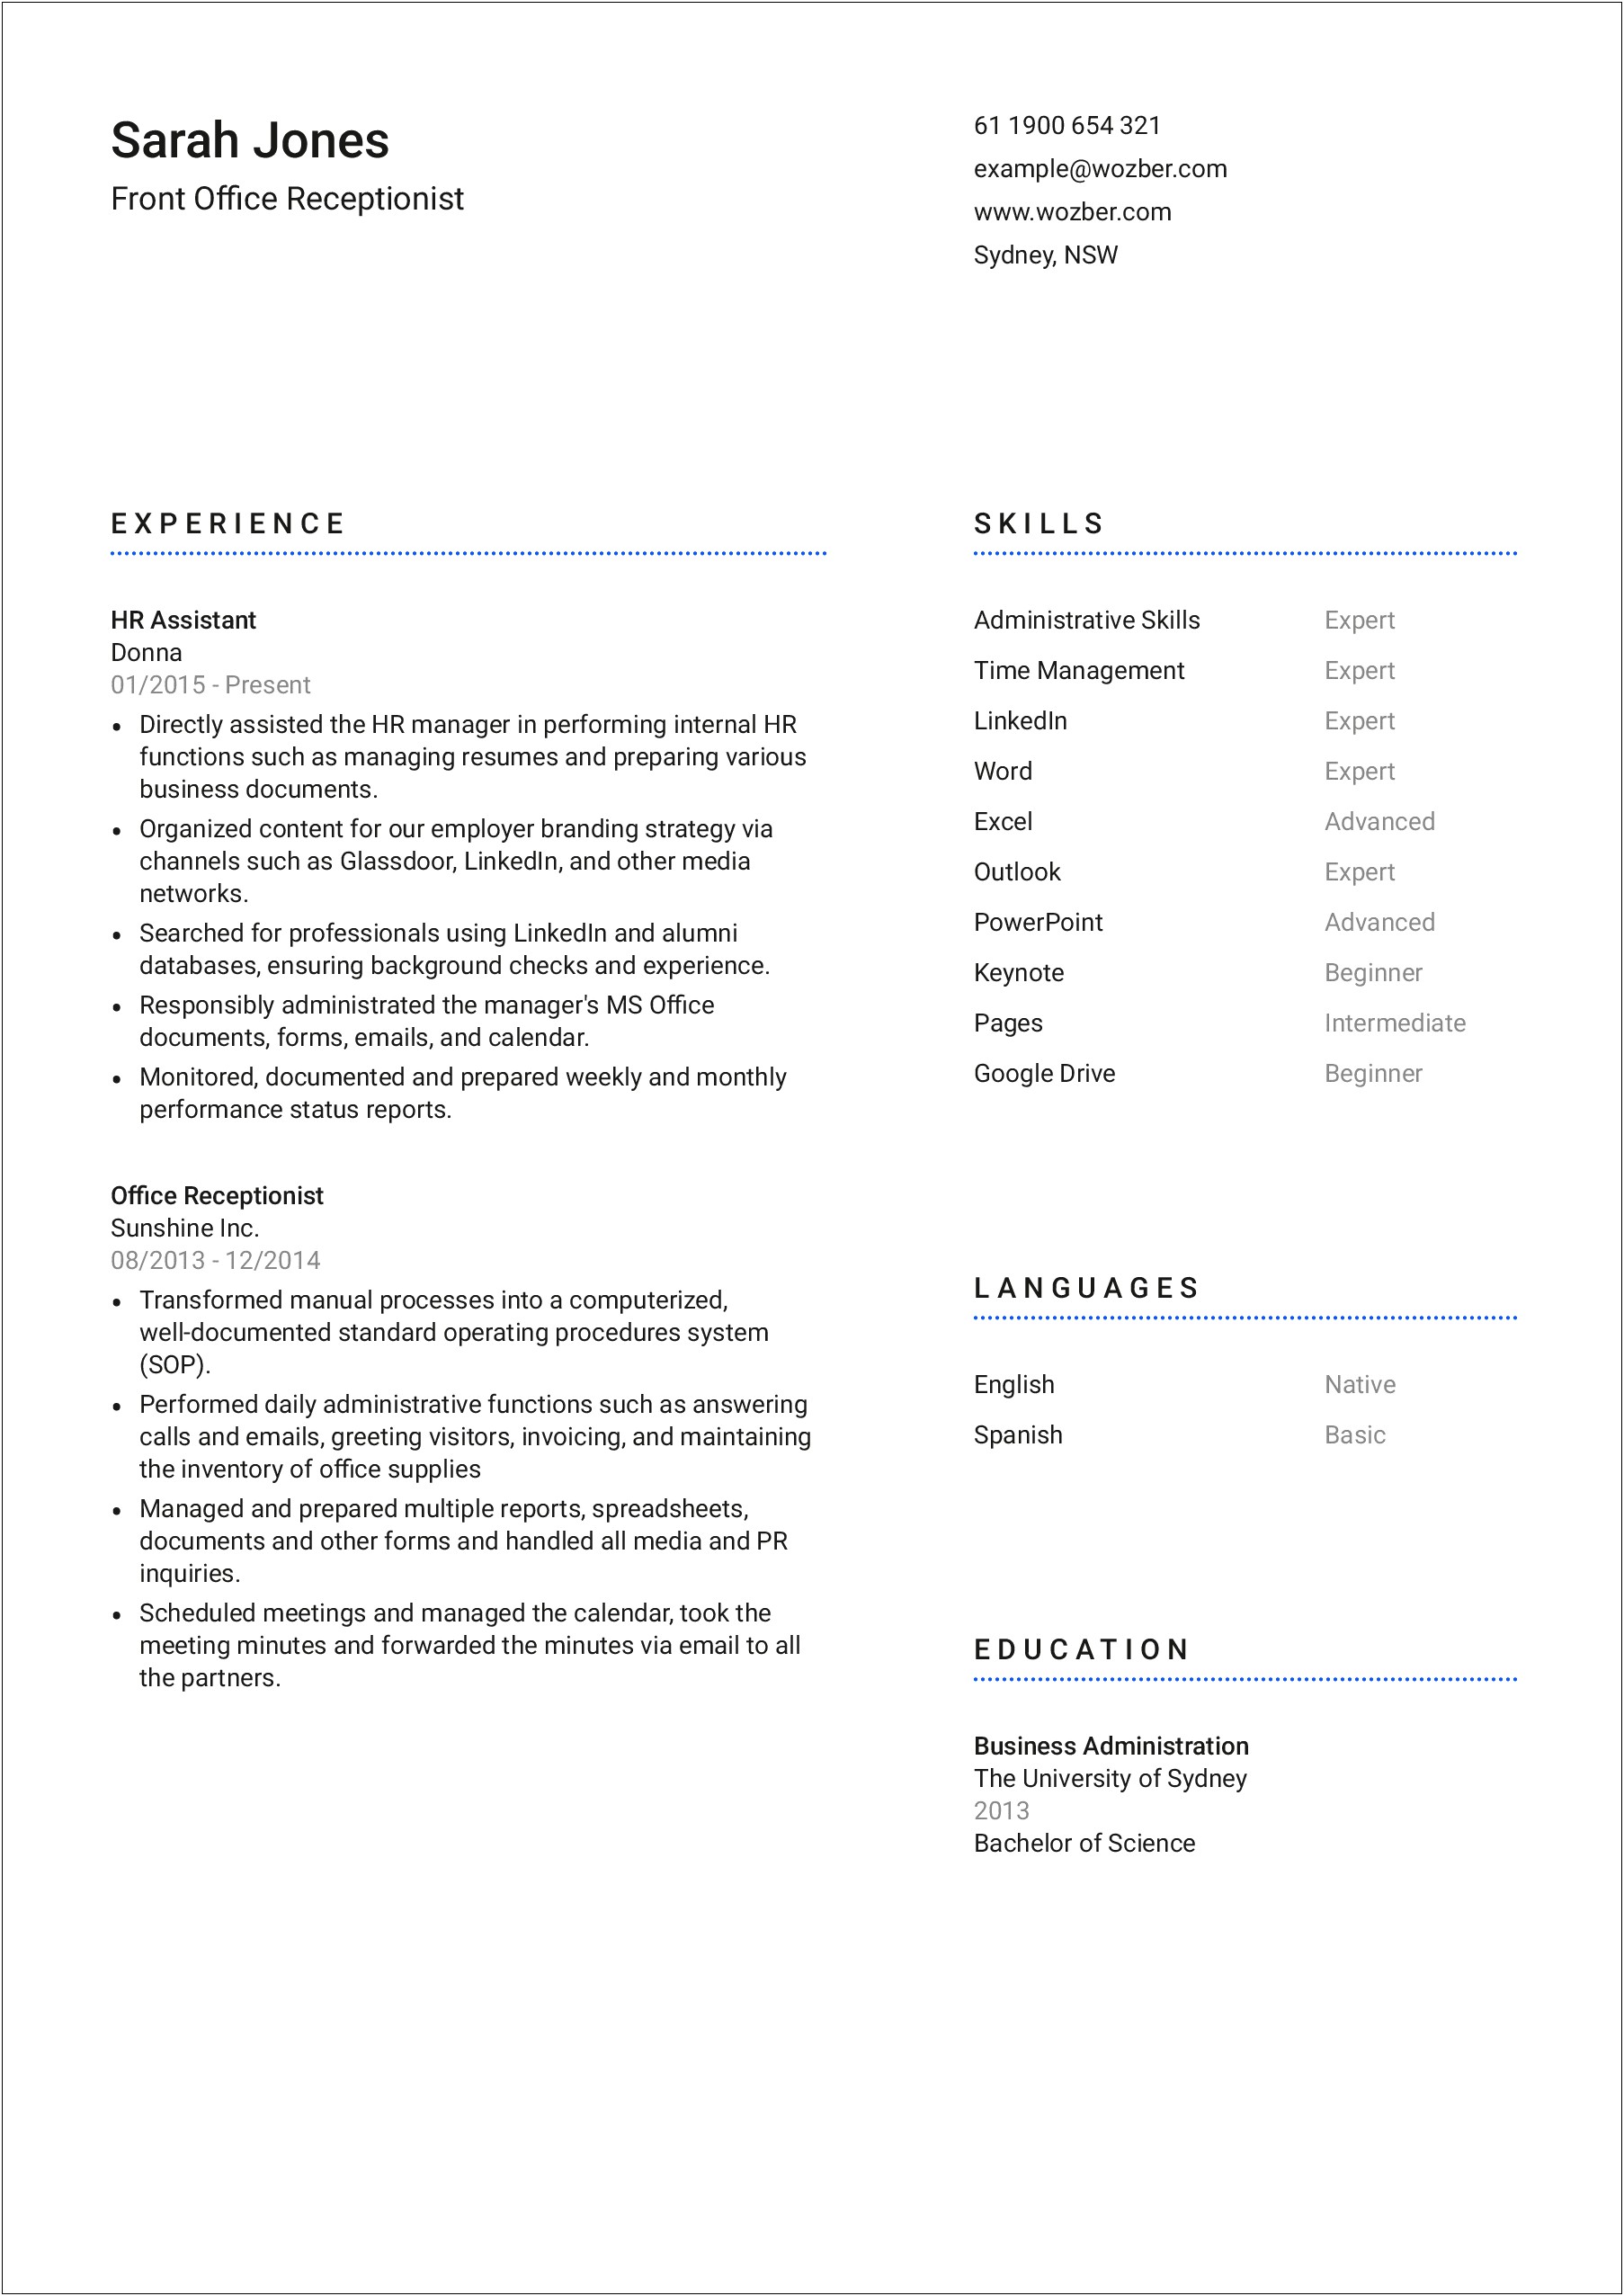 Examples Of Accomplishment Oriented Resume